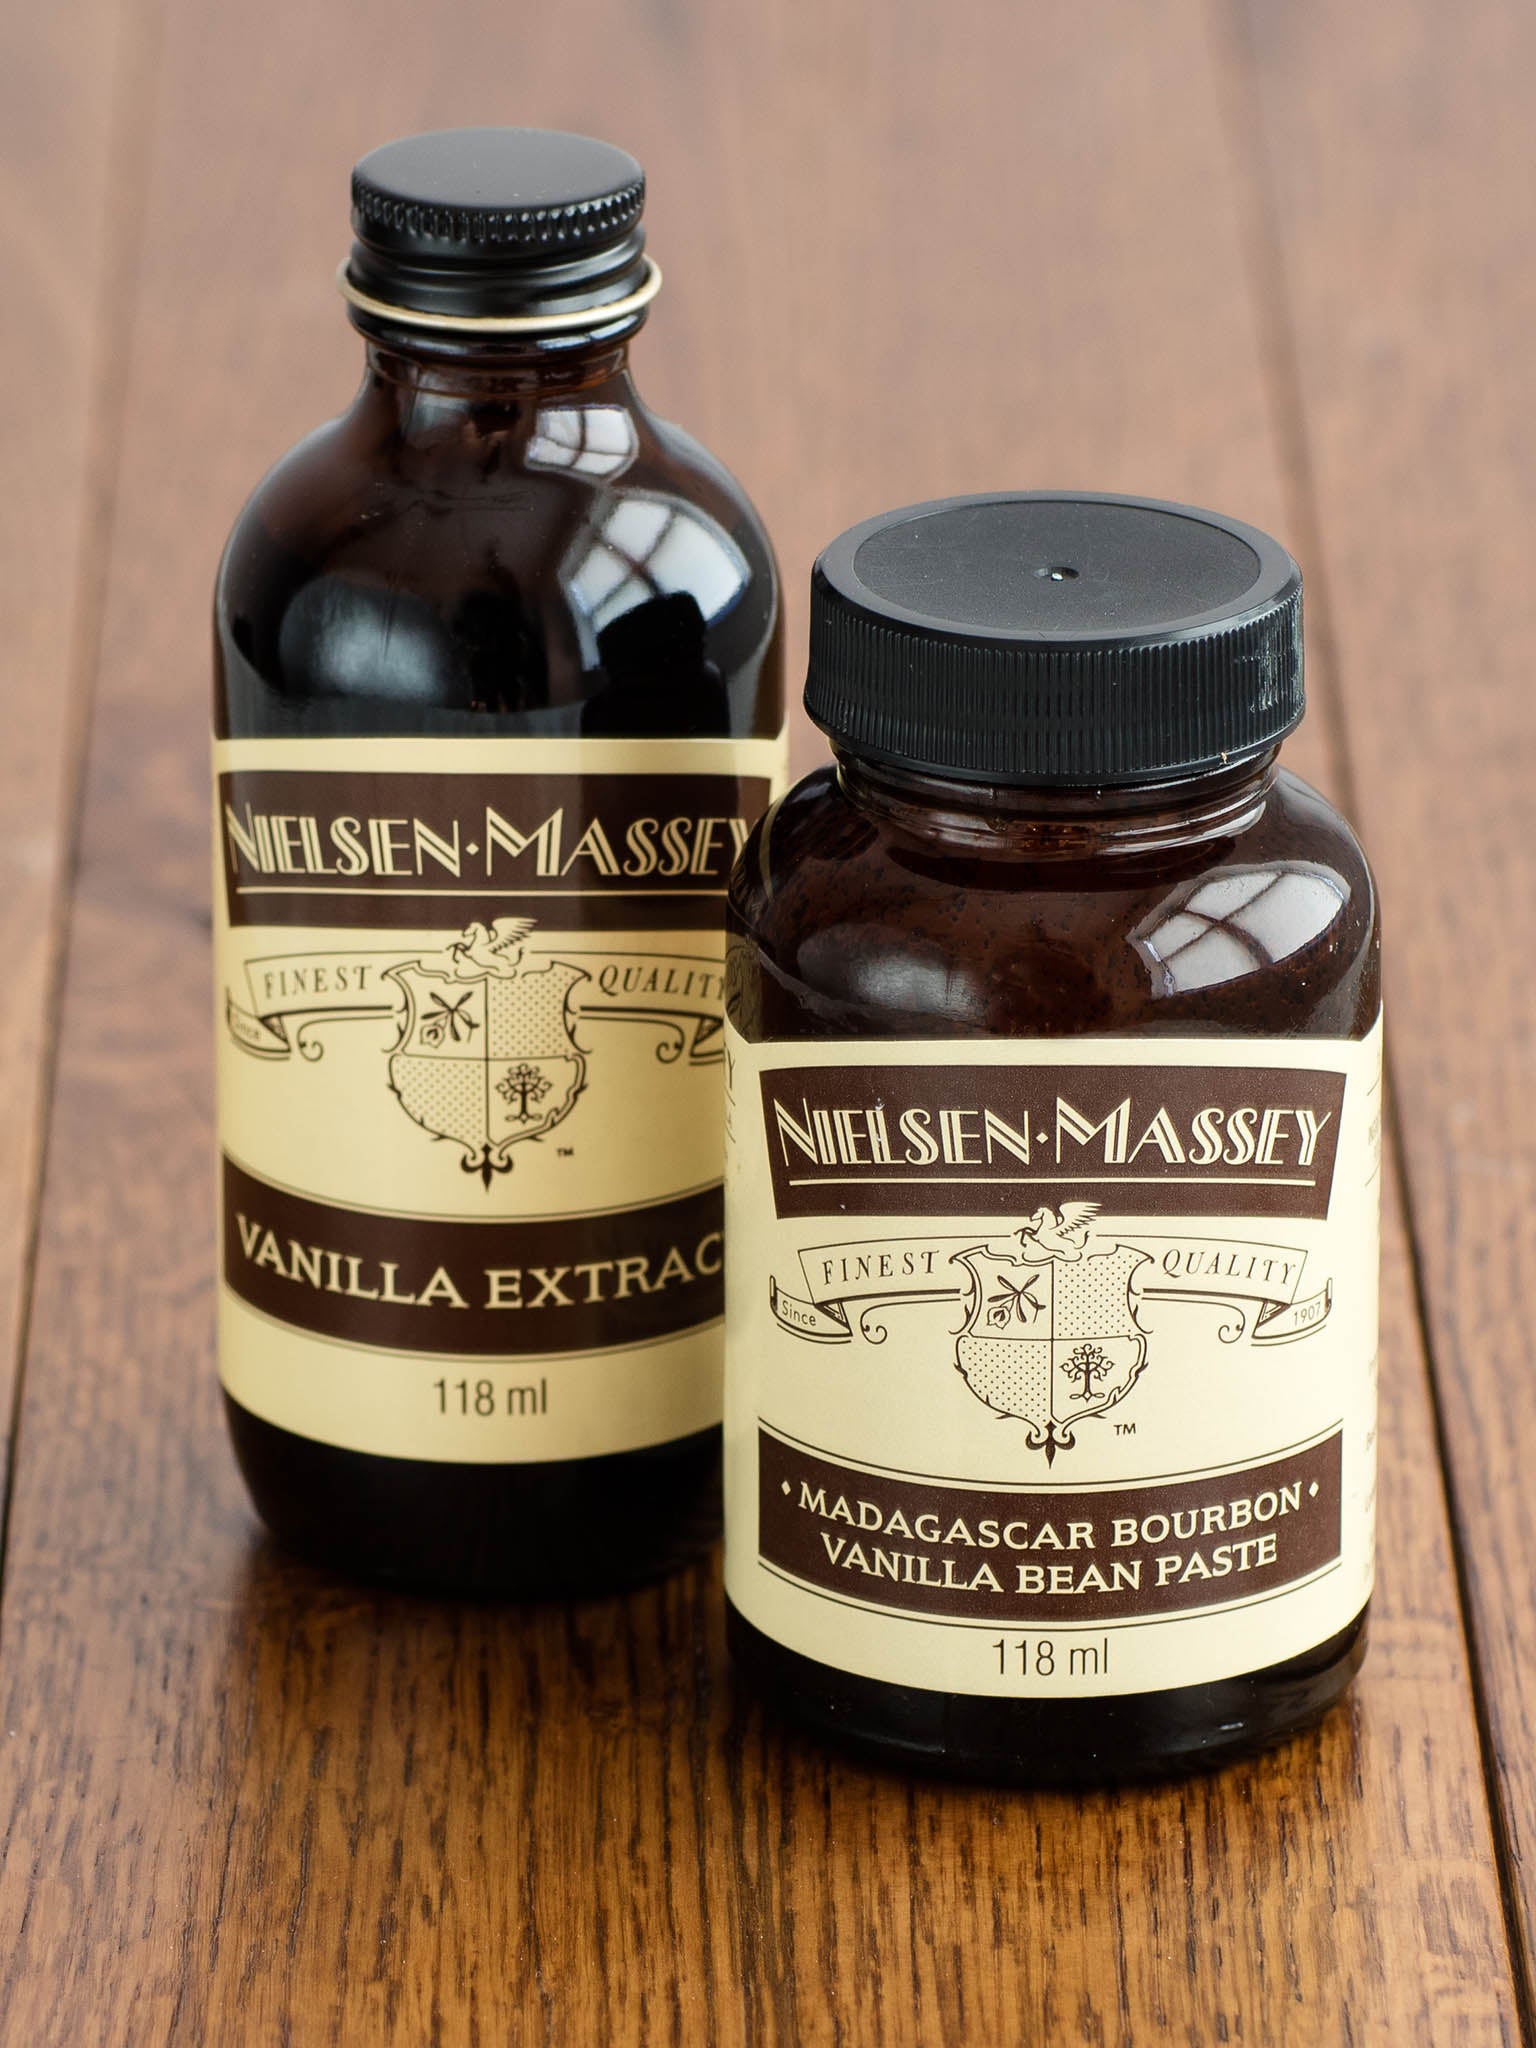 Nielsen Massey has been in the vanilla business for more than 100 years